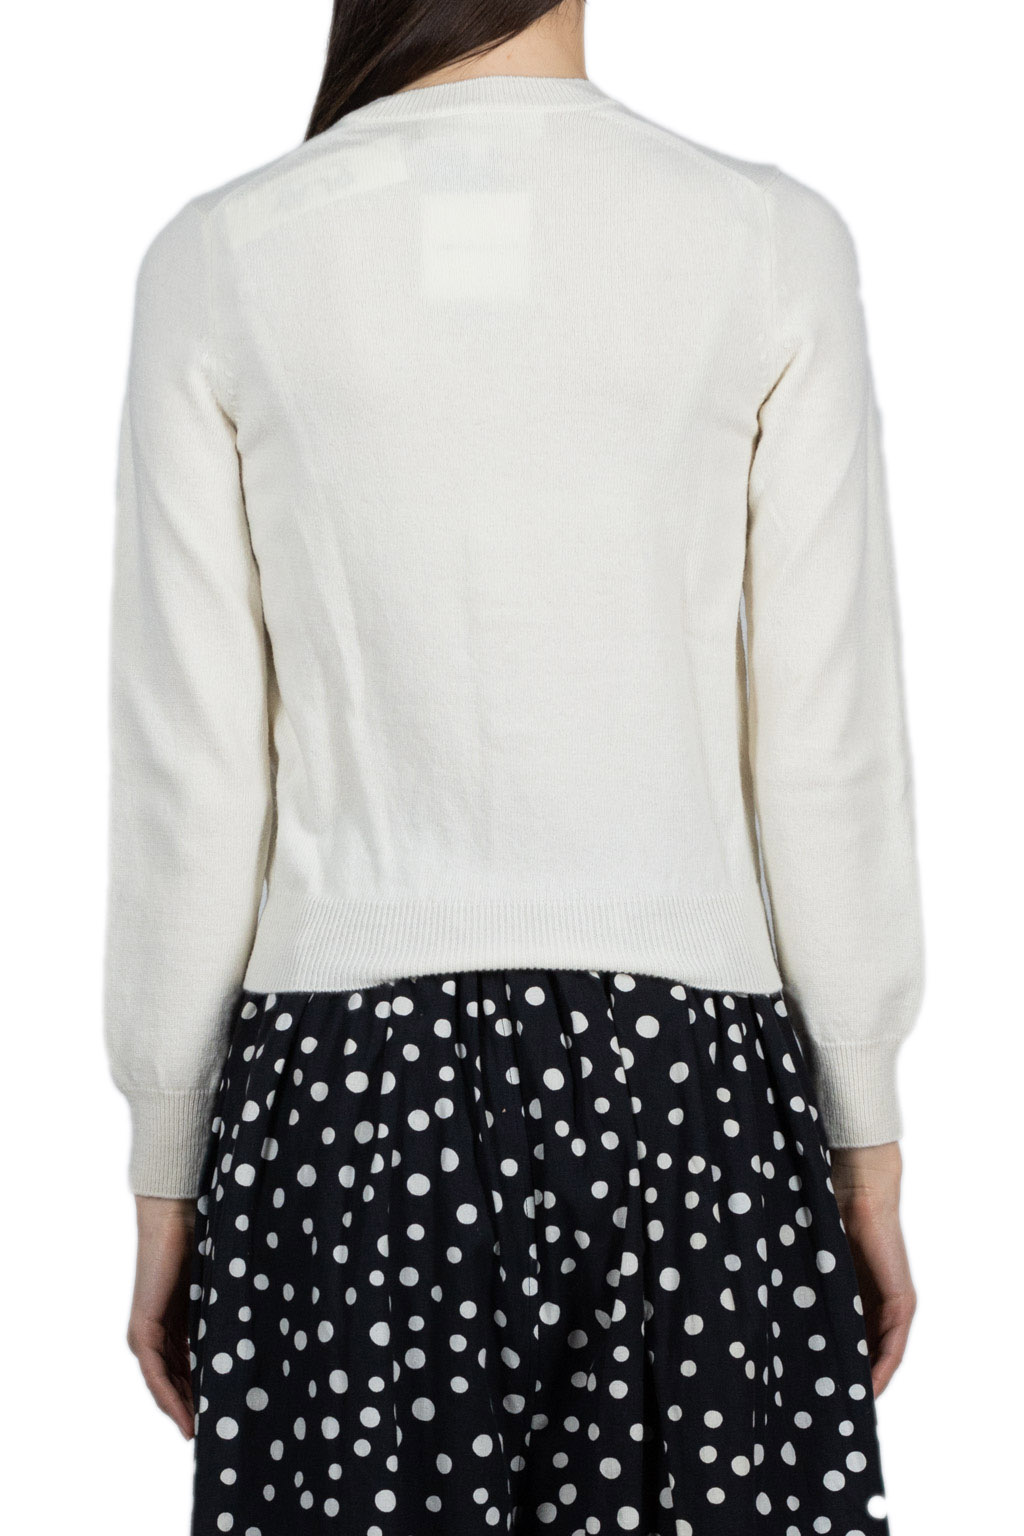 Comme Des Garcons Play White Heart Cardigan - Ivory